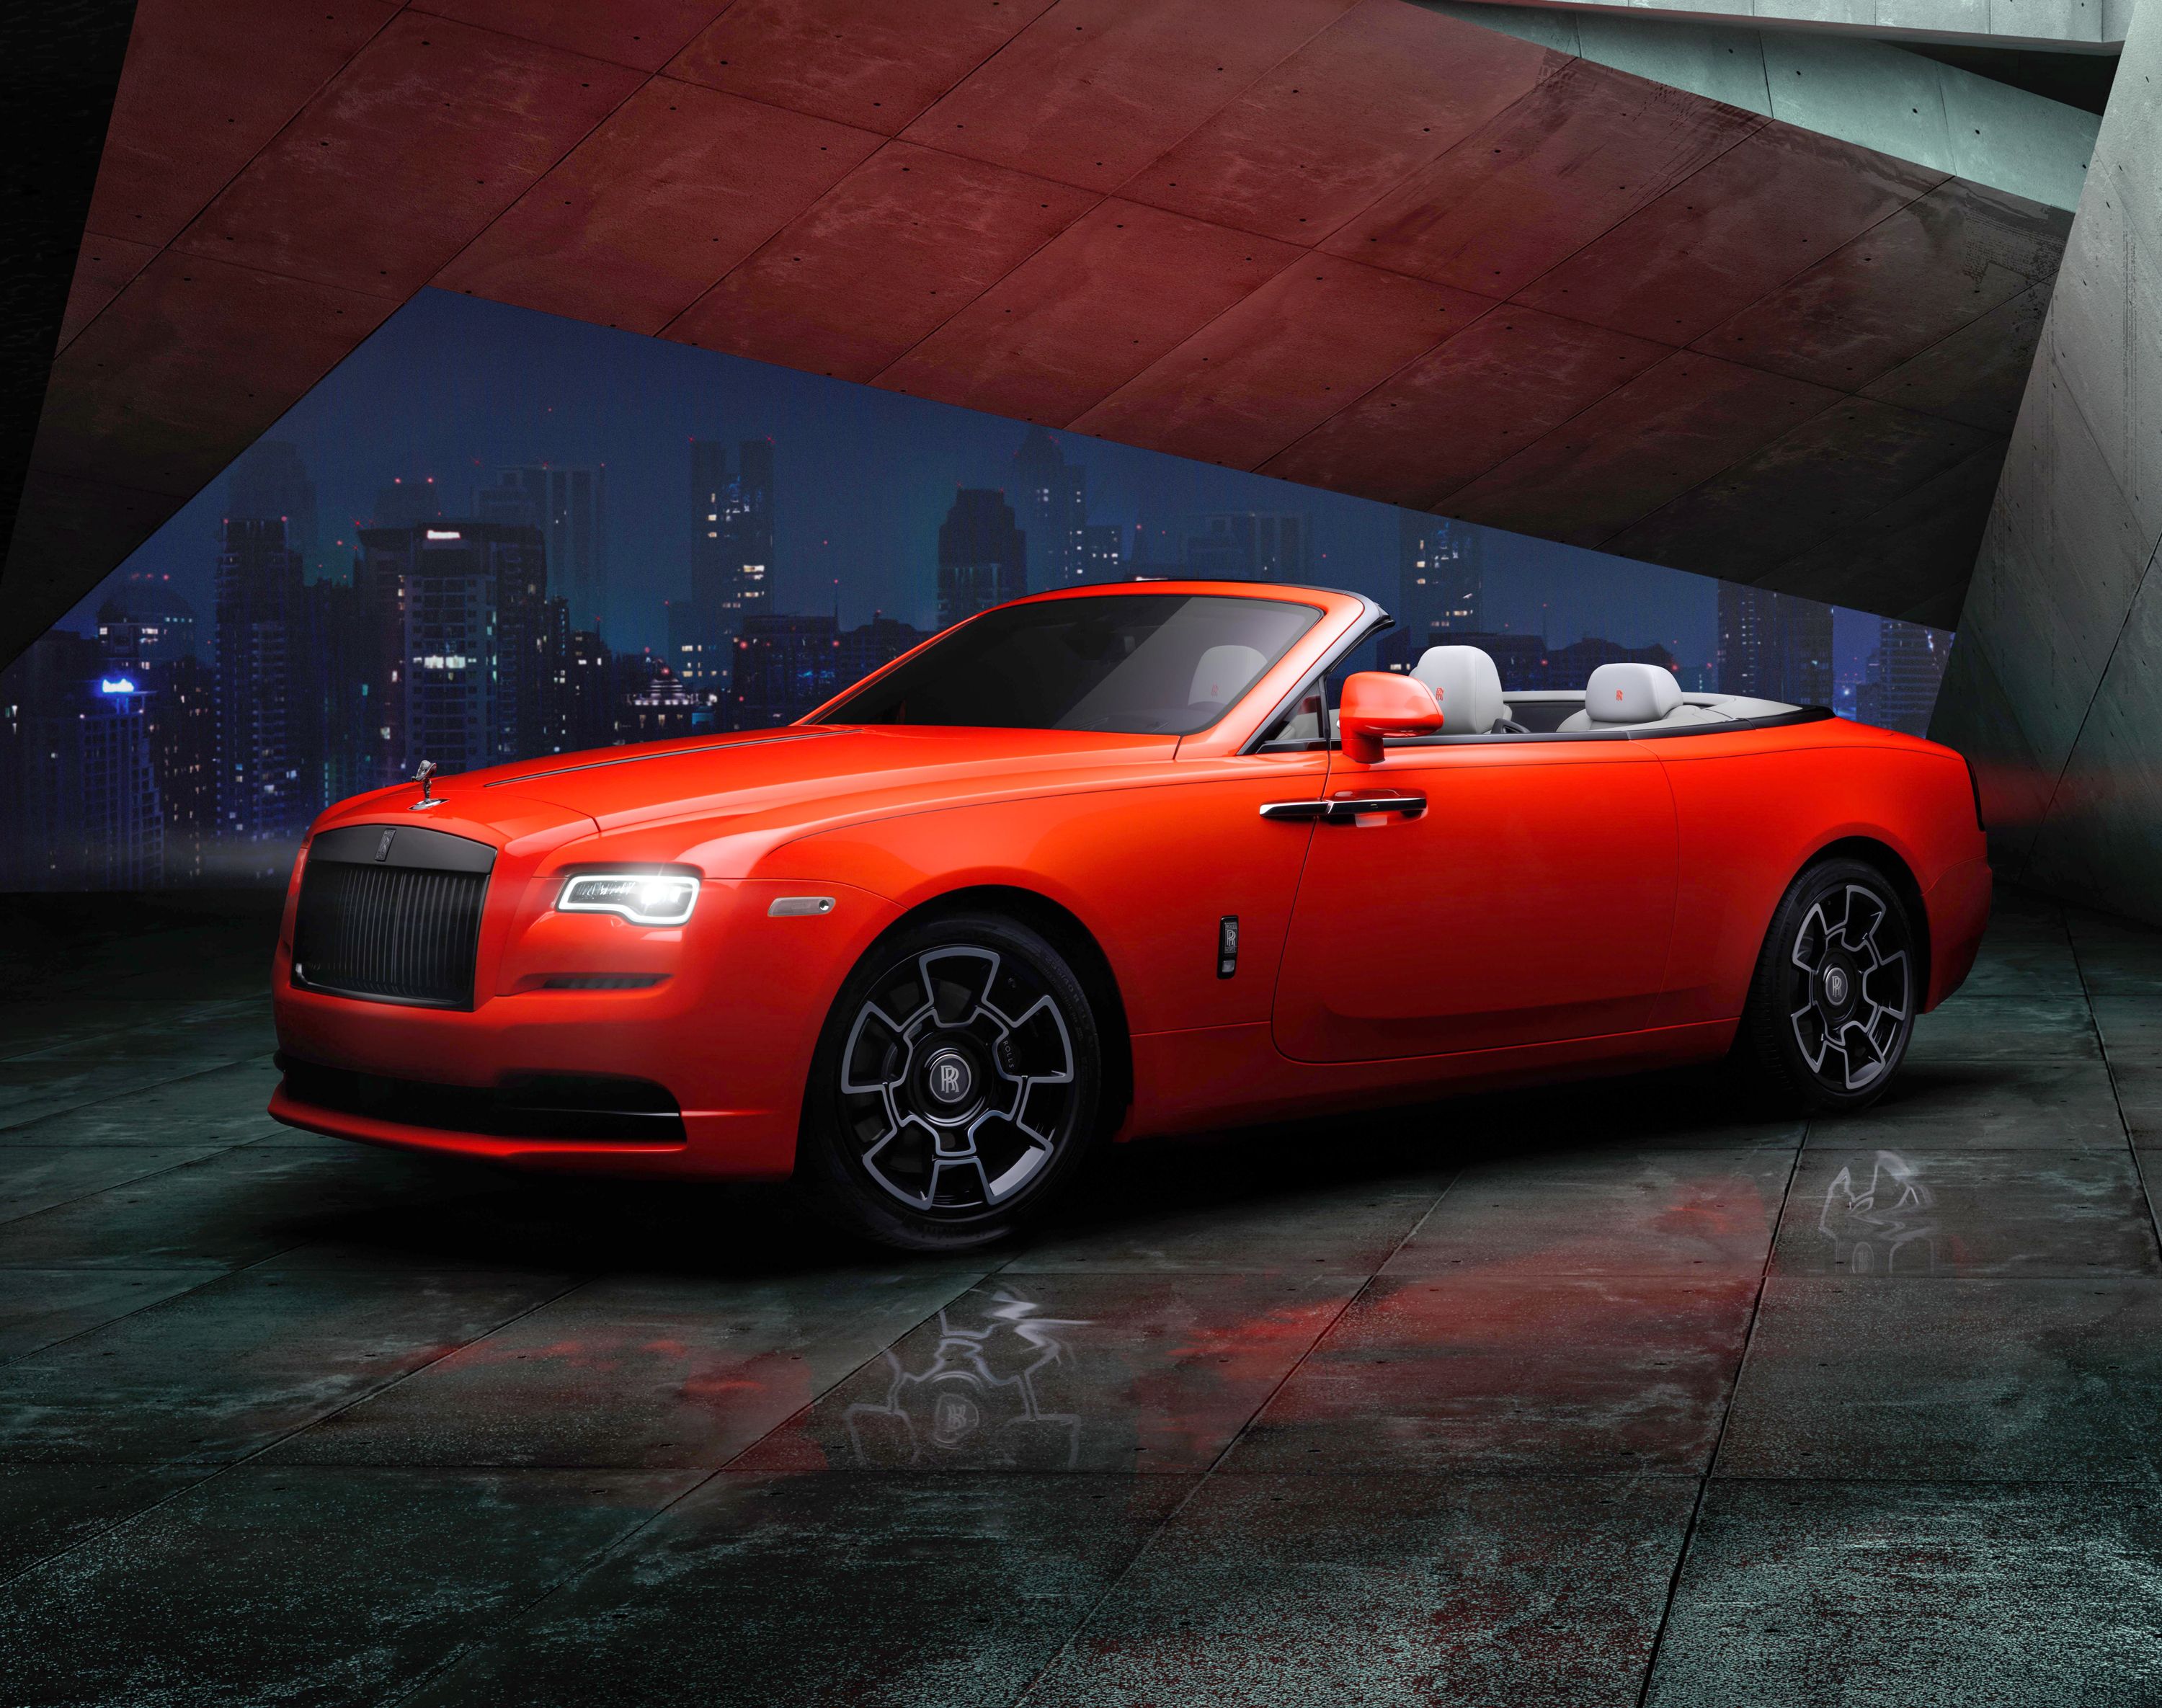 2021 RollsRoyce Dawn Review Pricing and Specs